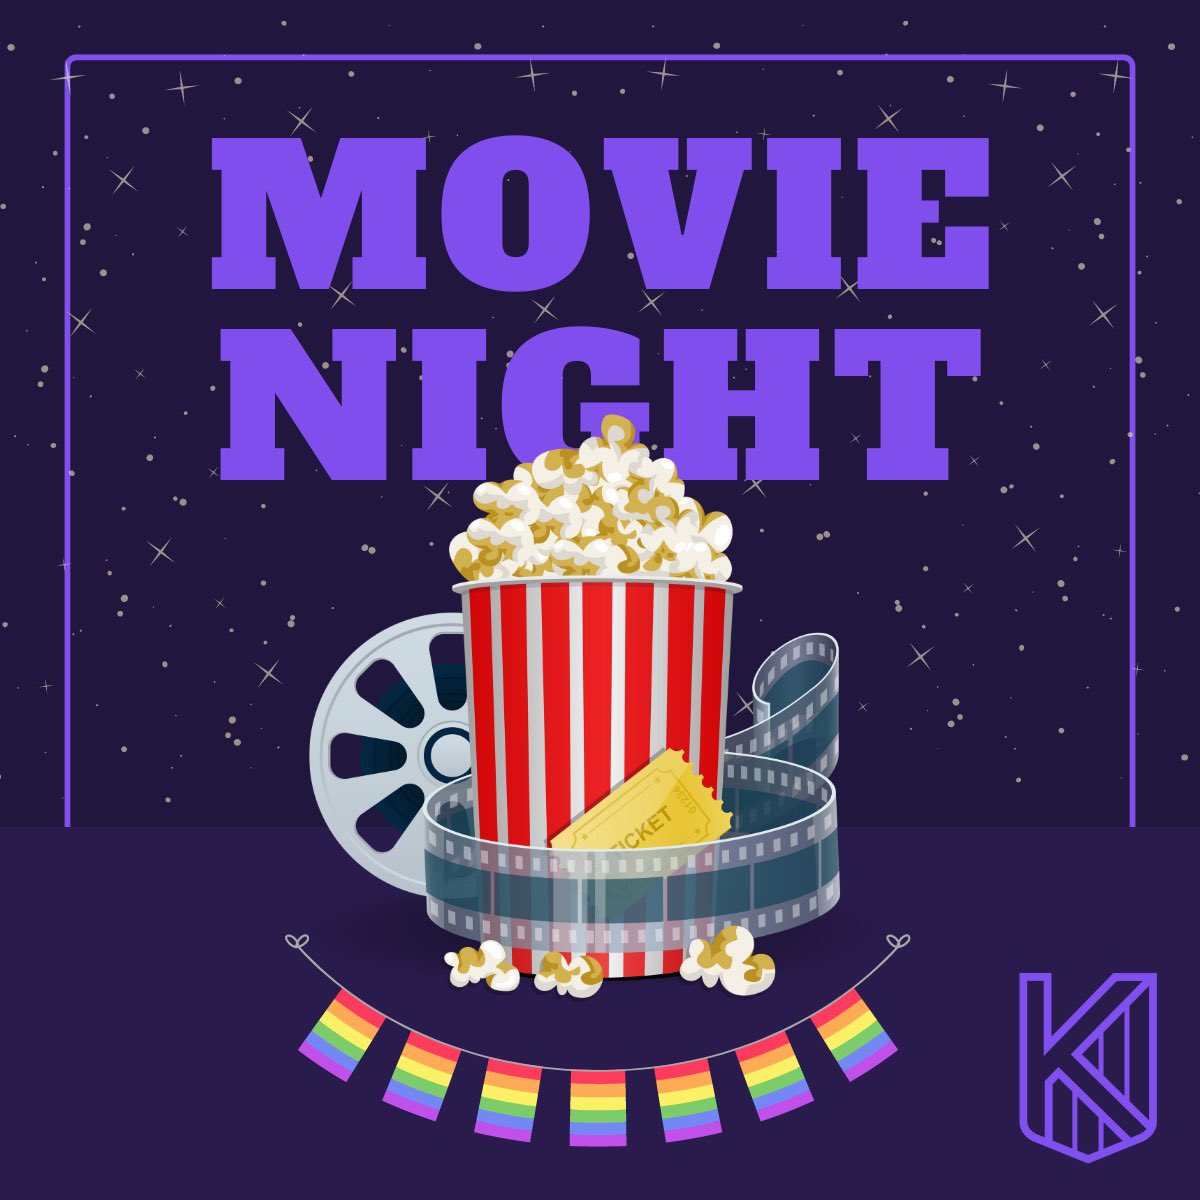 Great end to a busy day at the College - LGBTQ+ movie night! #LGBTQ+